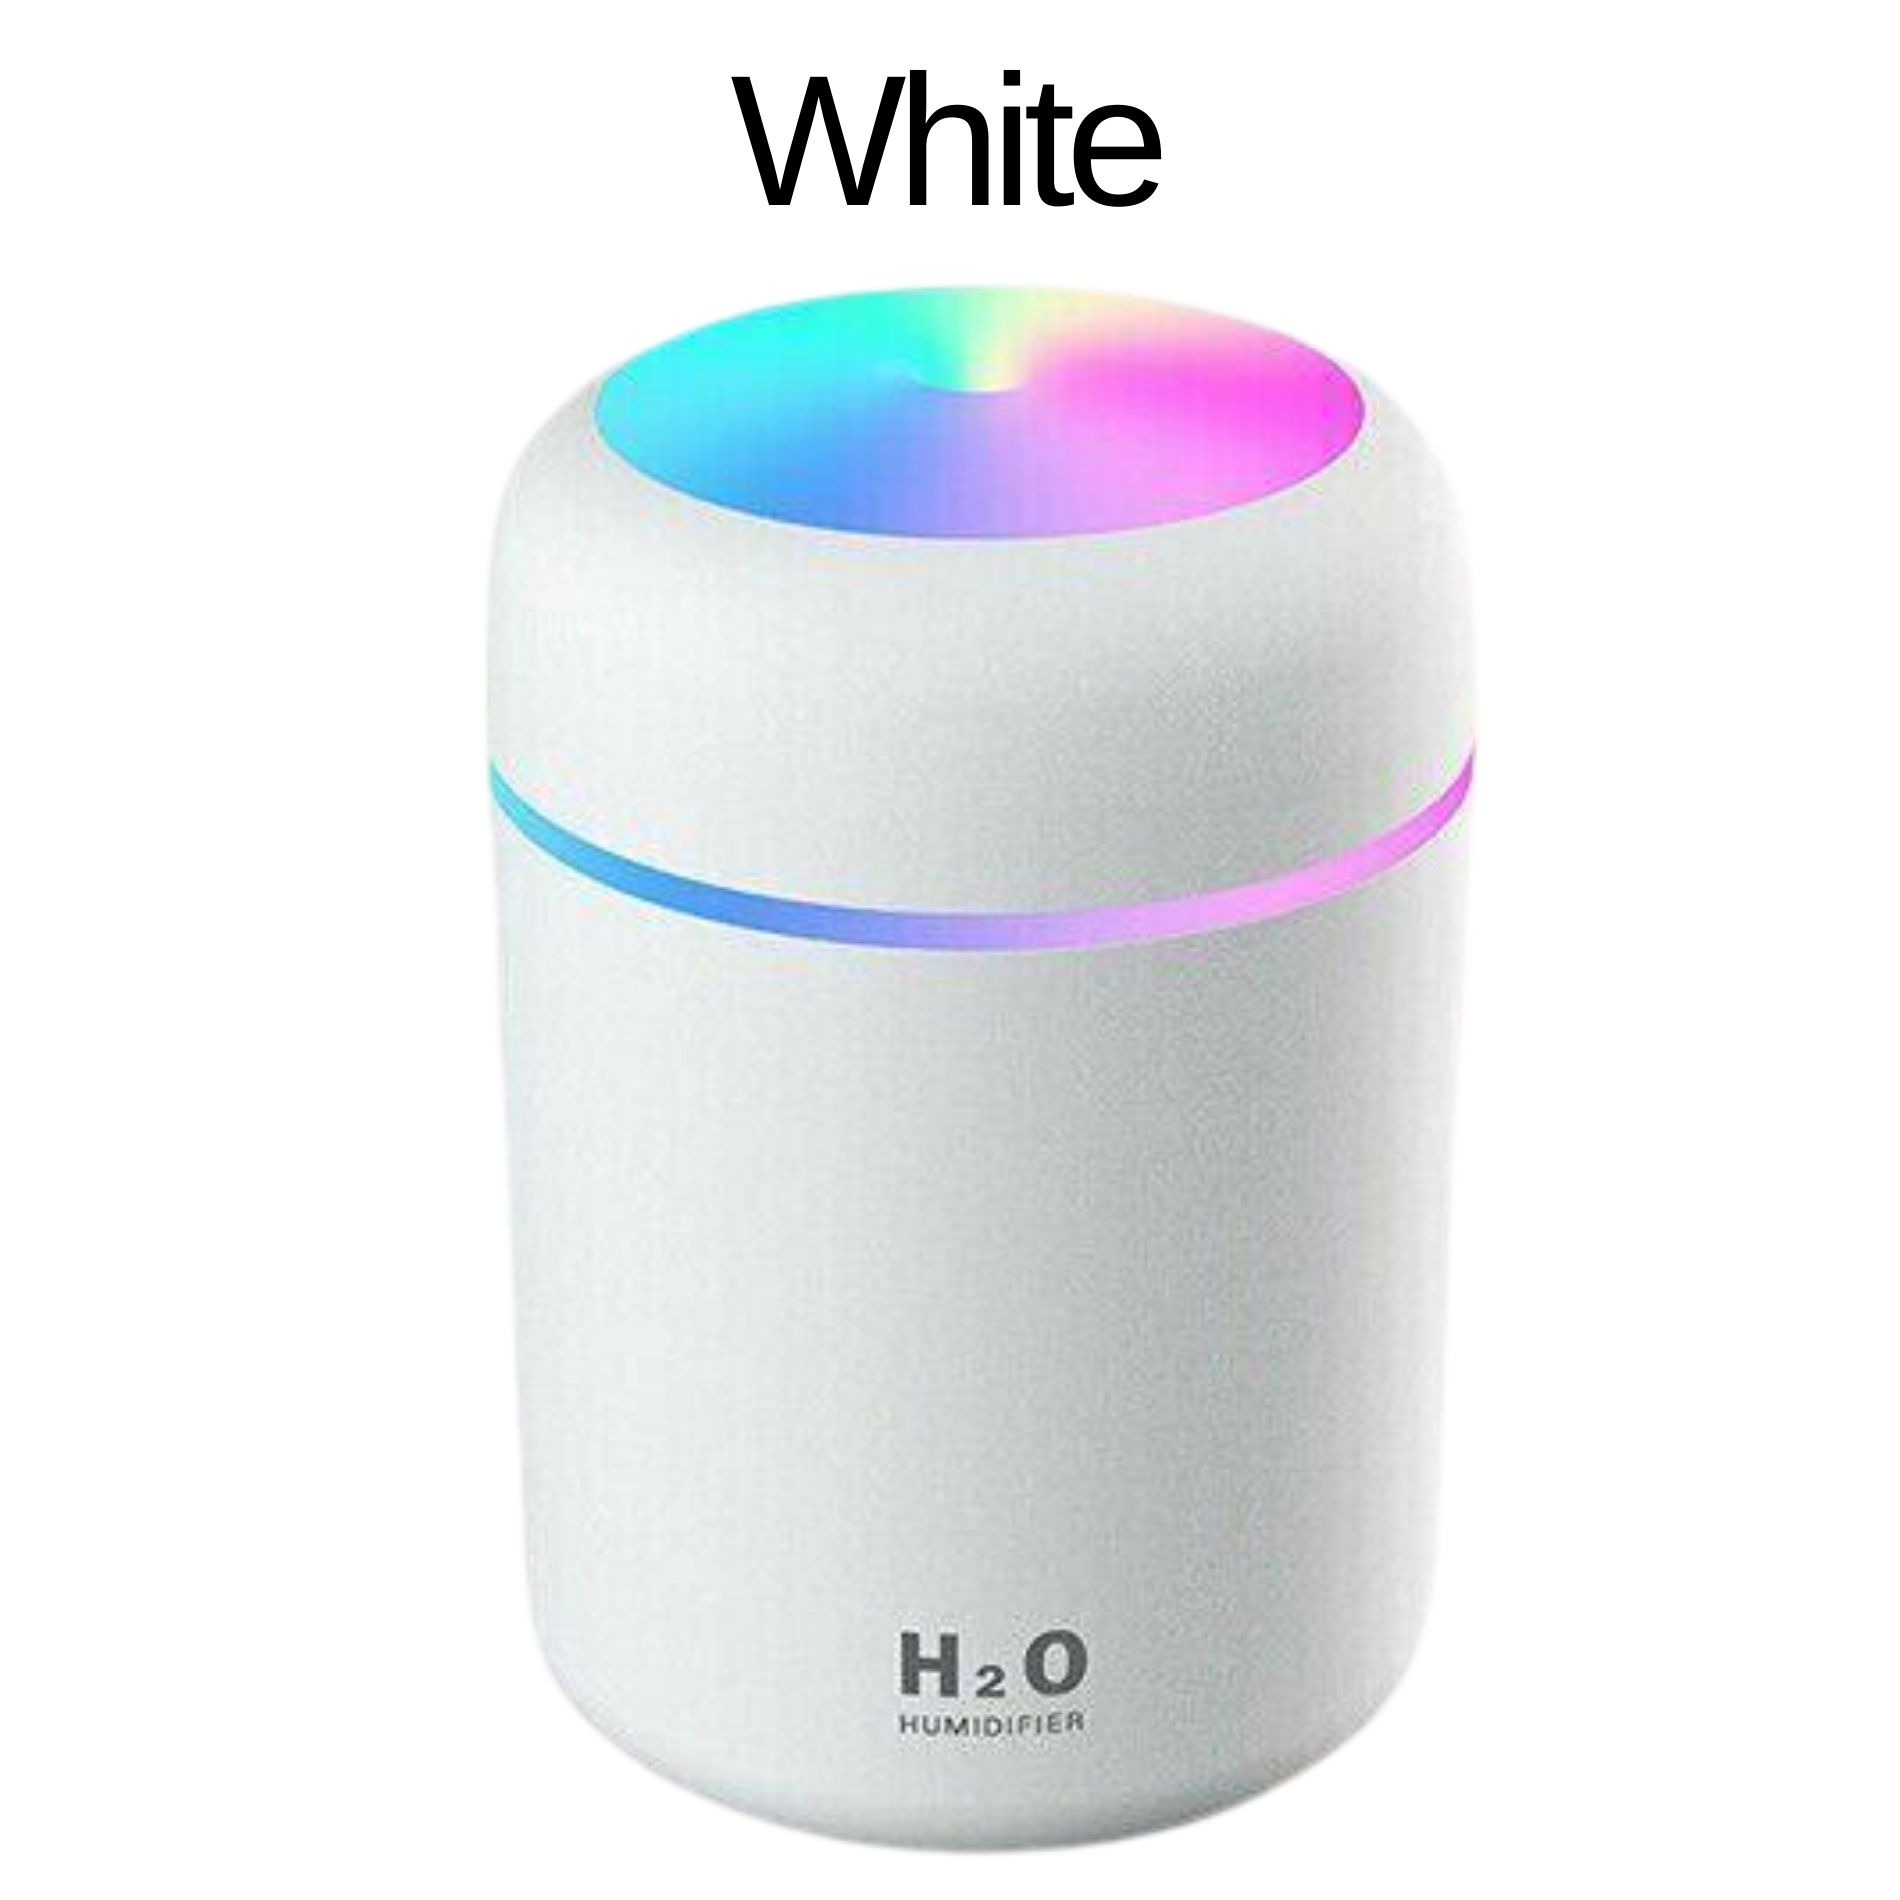 300ml Ultrasonic Turning Color Cup Humidifier USB Diffuser for Aroma in Home Office Car with Rainbow Light LED